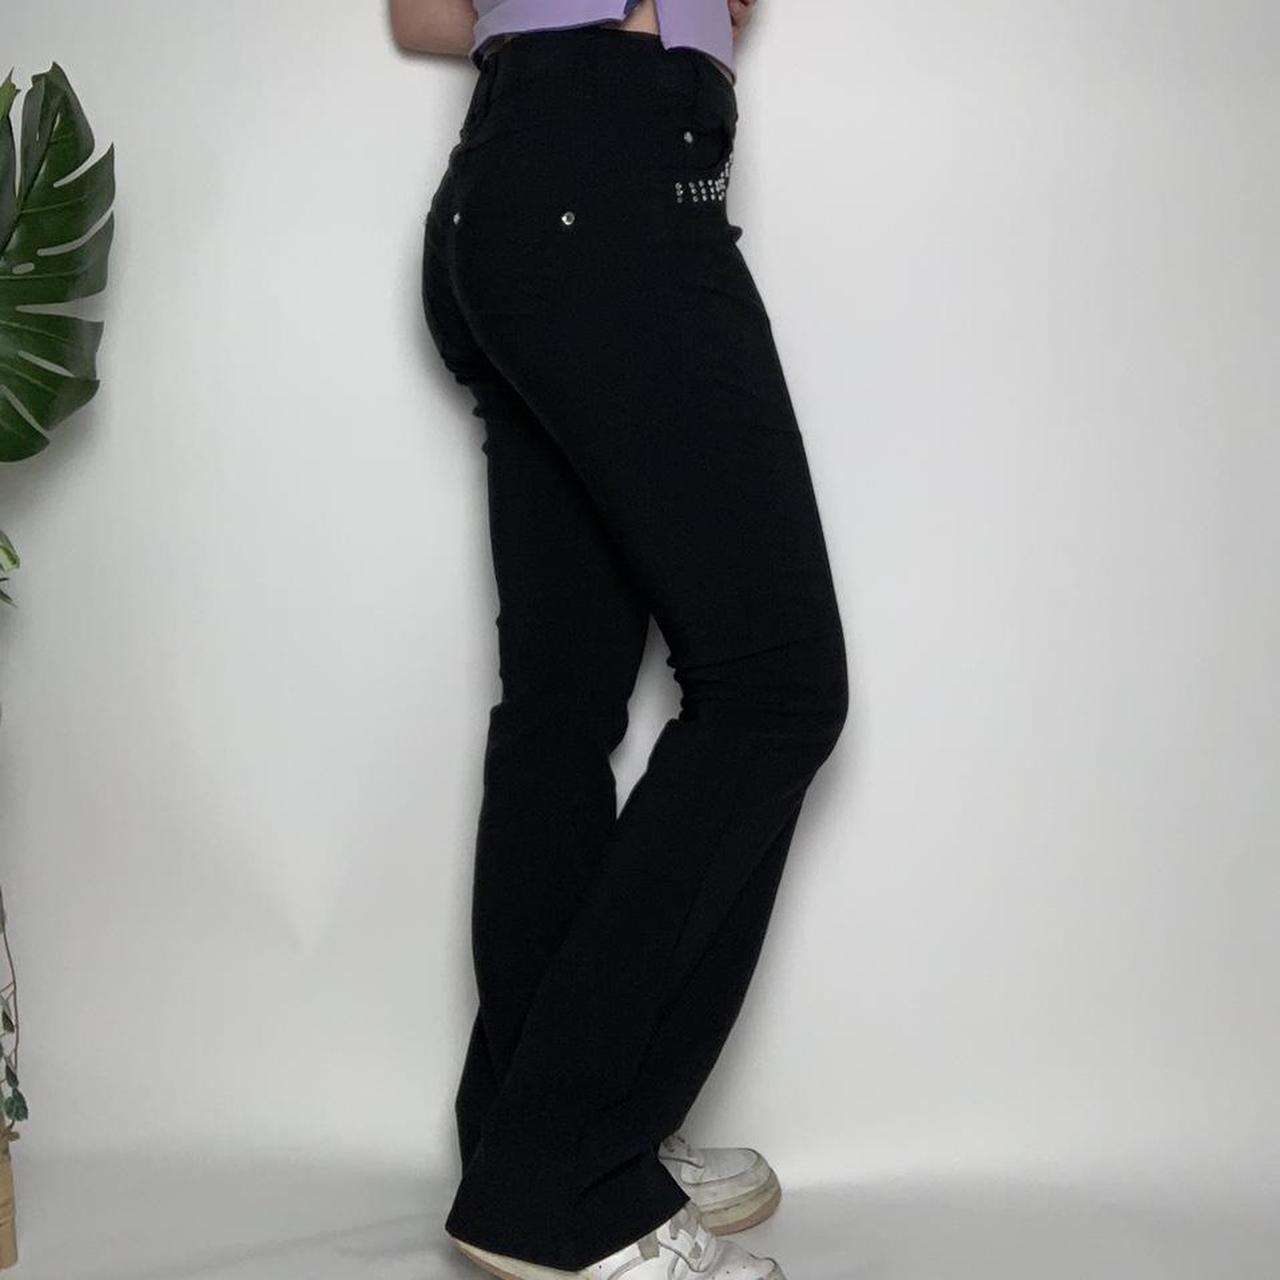 Flared vintage y2k low waisted black trousers with diamanté detailing